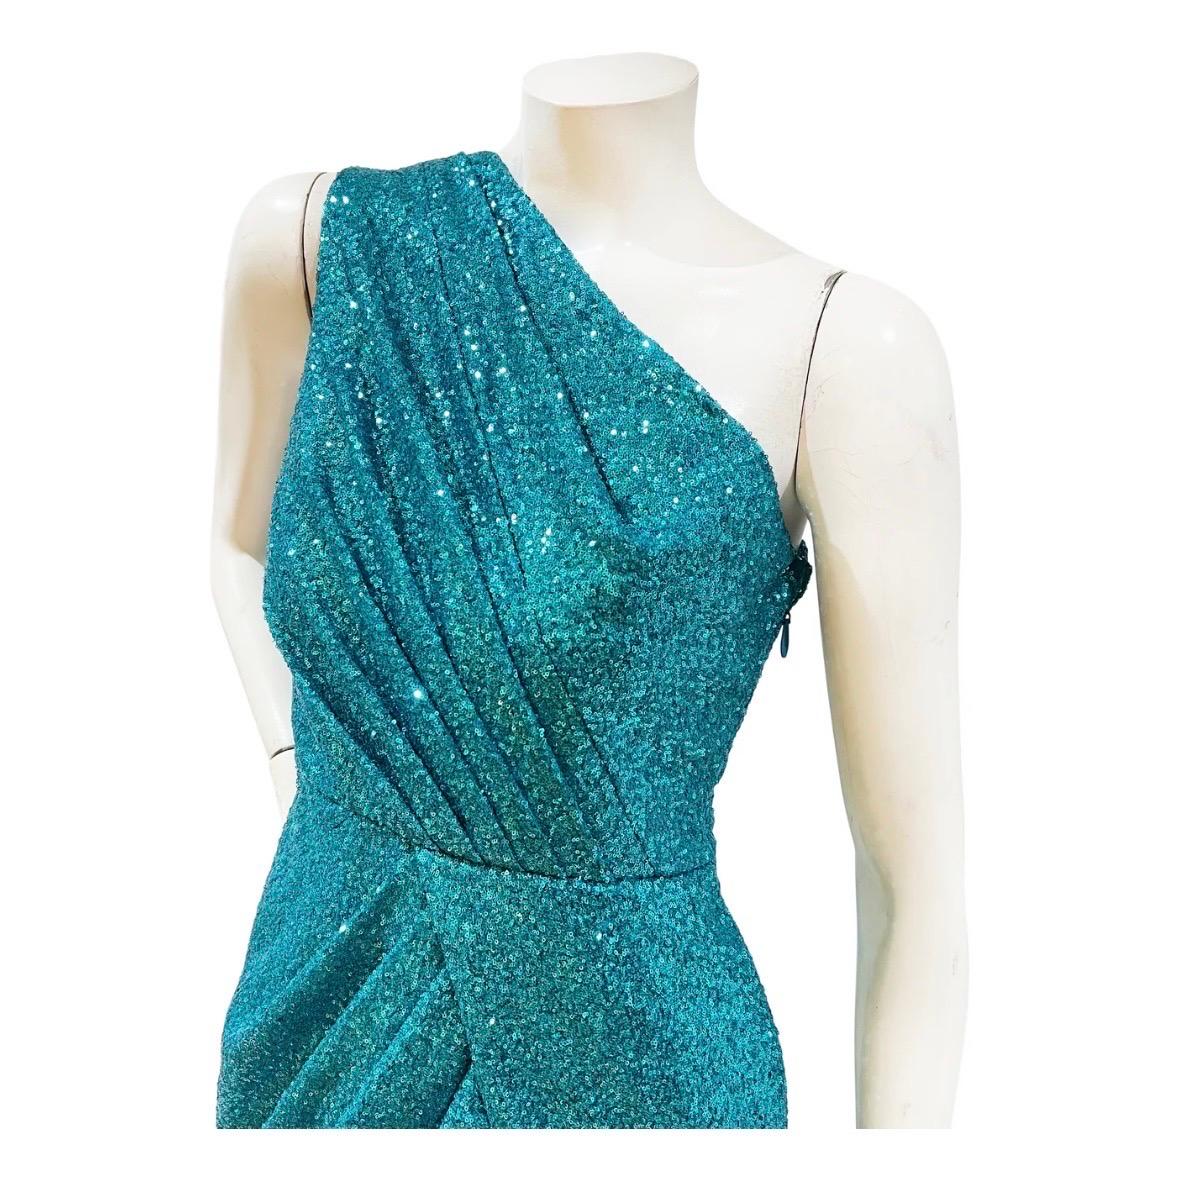 Sequin gown by Elie Saab
Made in Lebanon
One shoulder 
Turquoise sequins throughout 
Decorative asymmetrical pleating through bust and waist 
Shoulder sash that hangs freely on back 
Side zipper and hook closure 
Floor length 
Fabric: 100% polyester